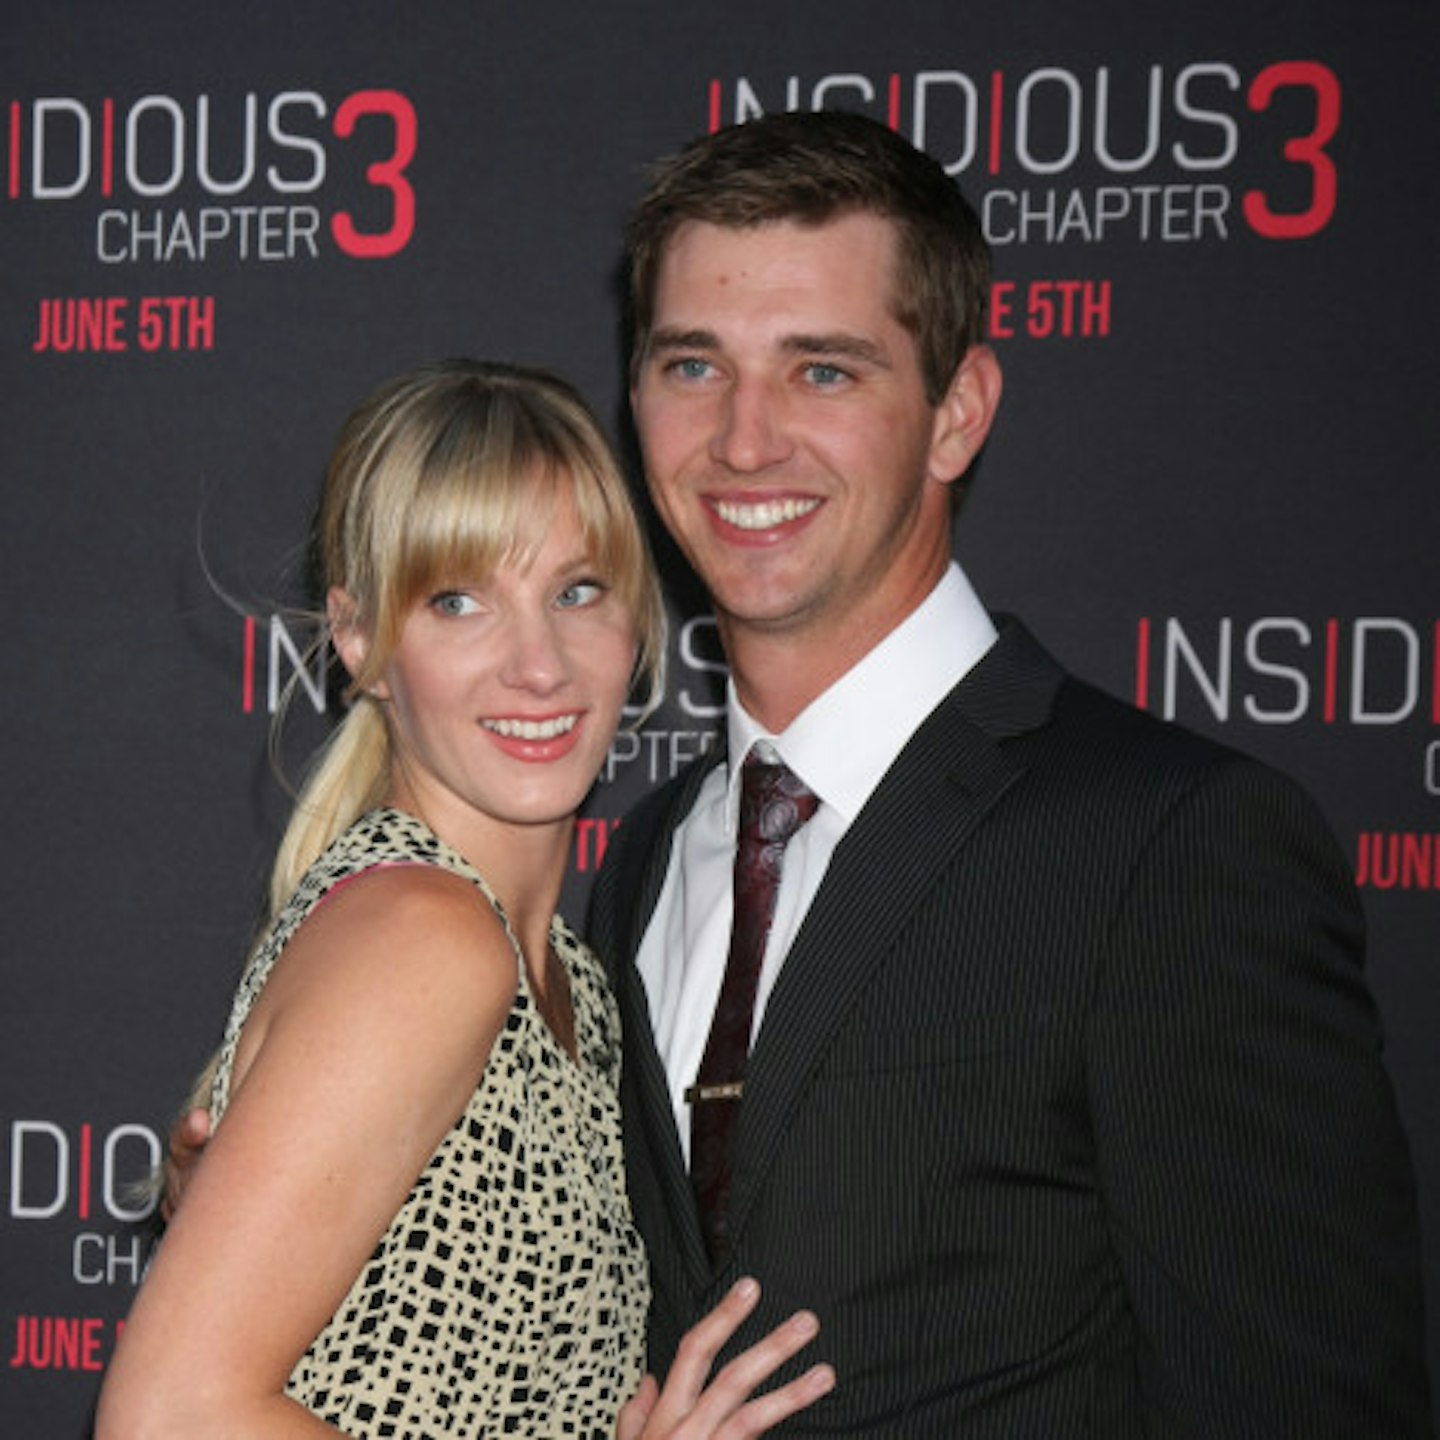 Heather and husband Taylor